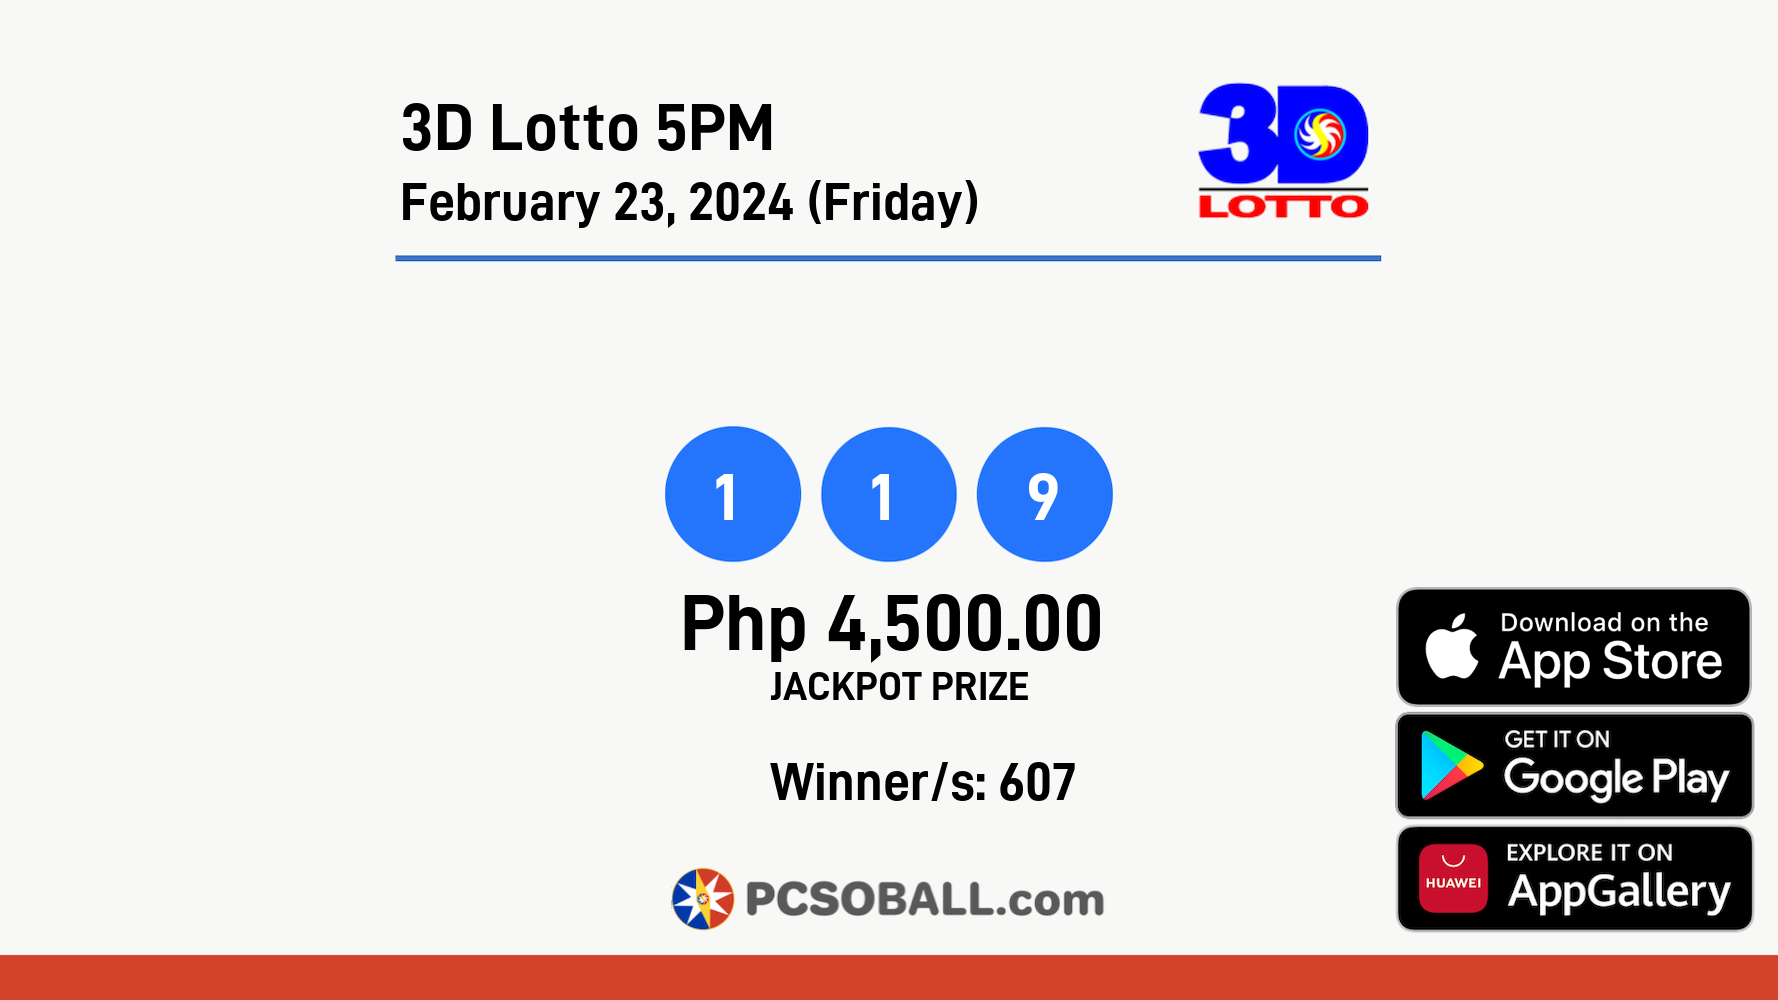 3D Lotto 5PM February 23, 2024 (Friday) Result